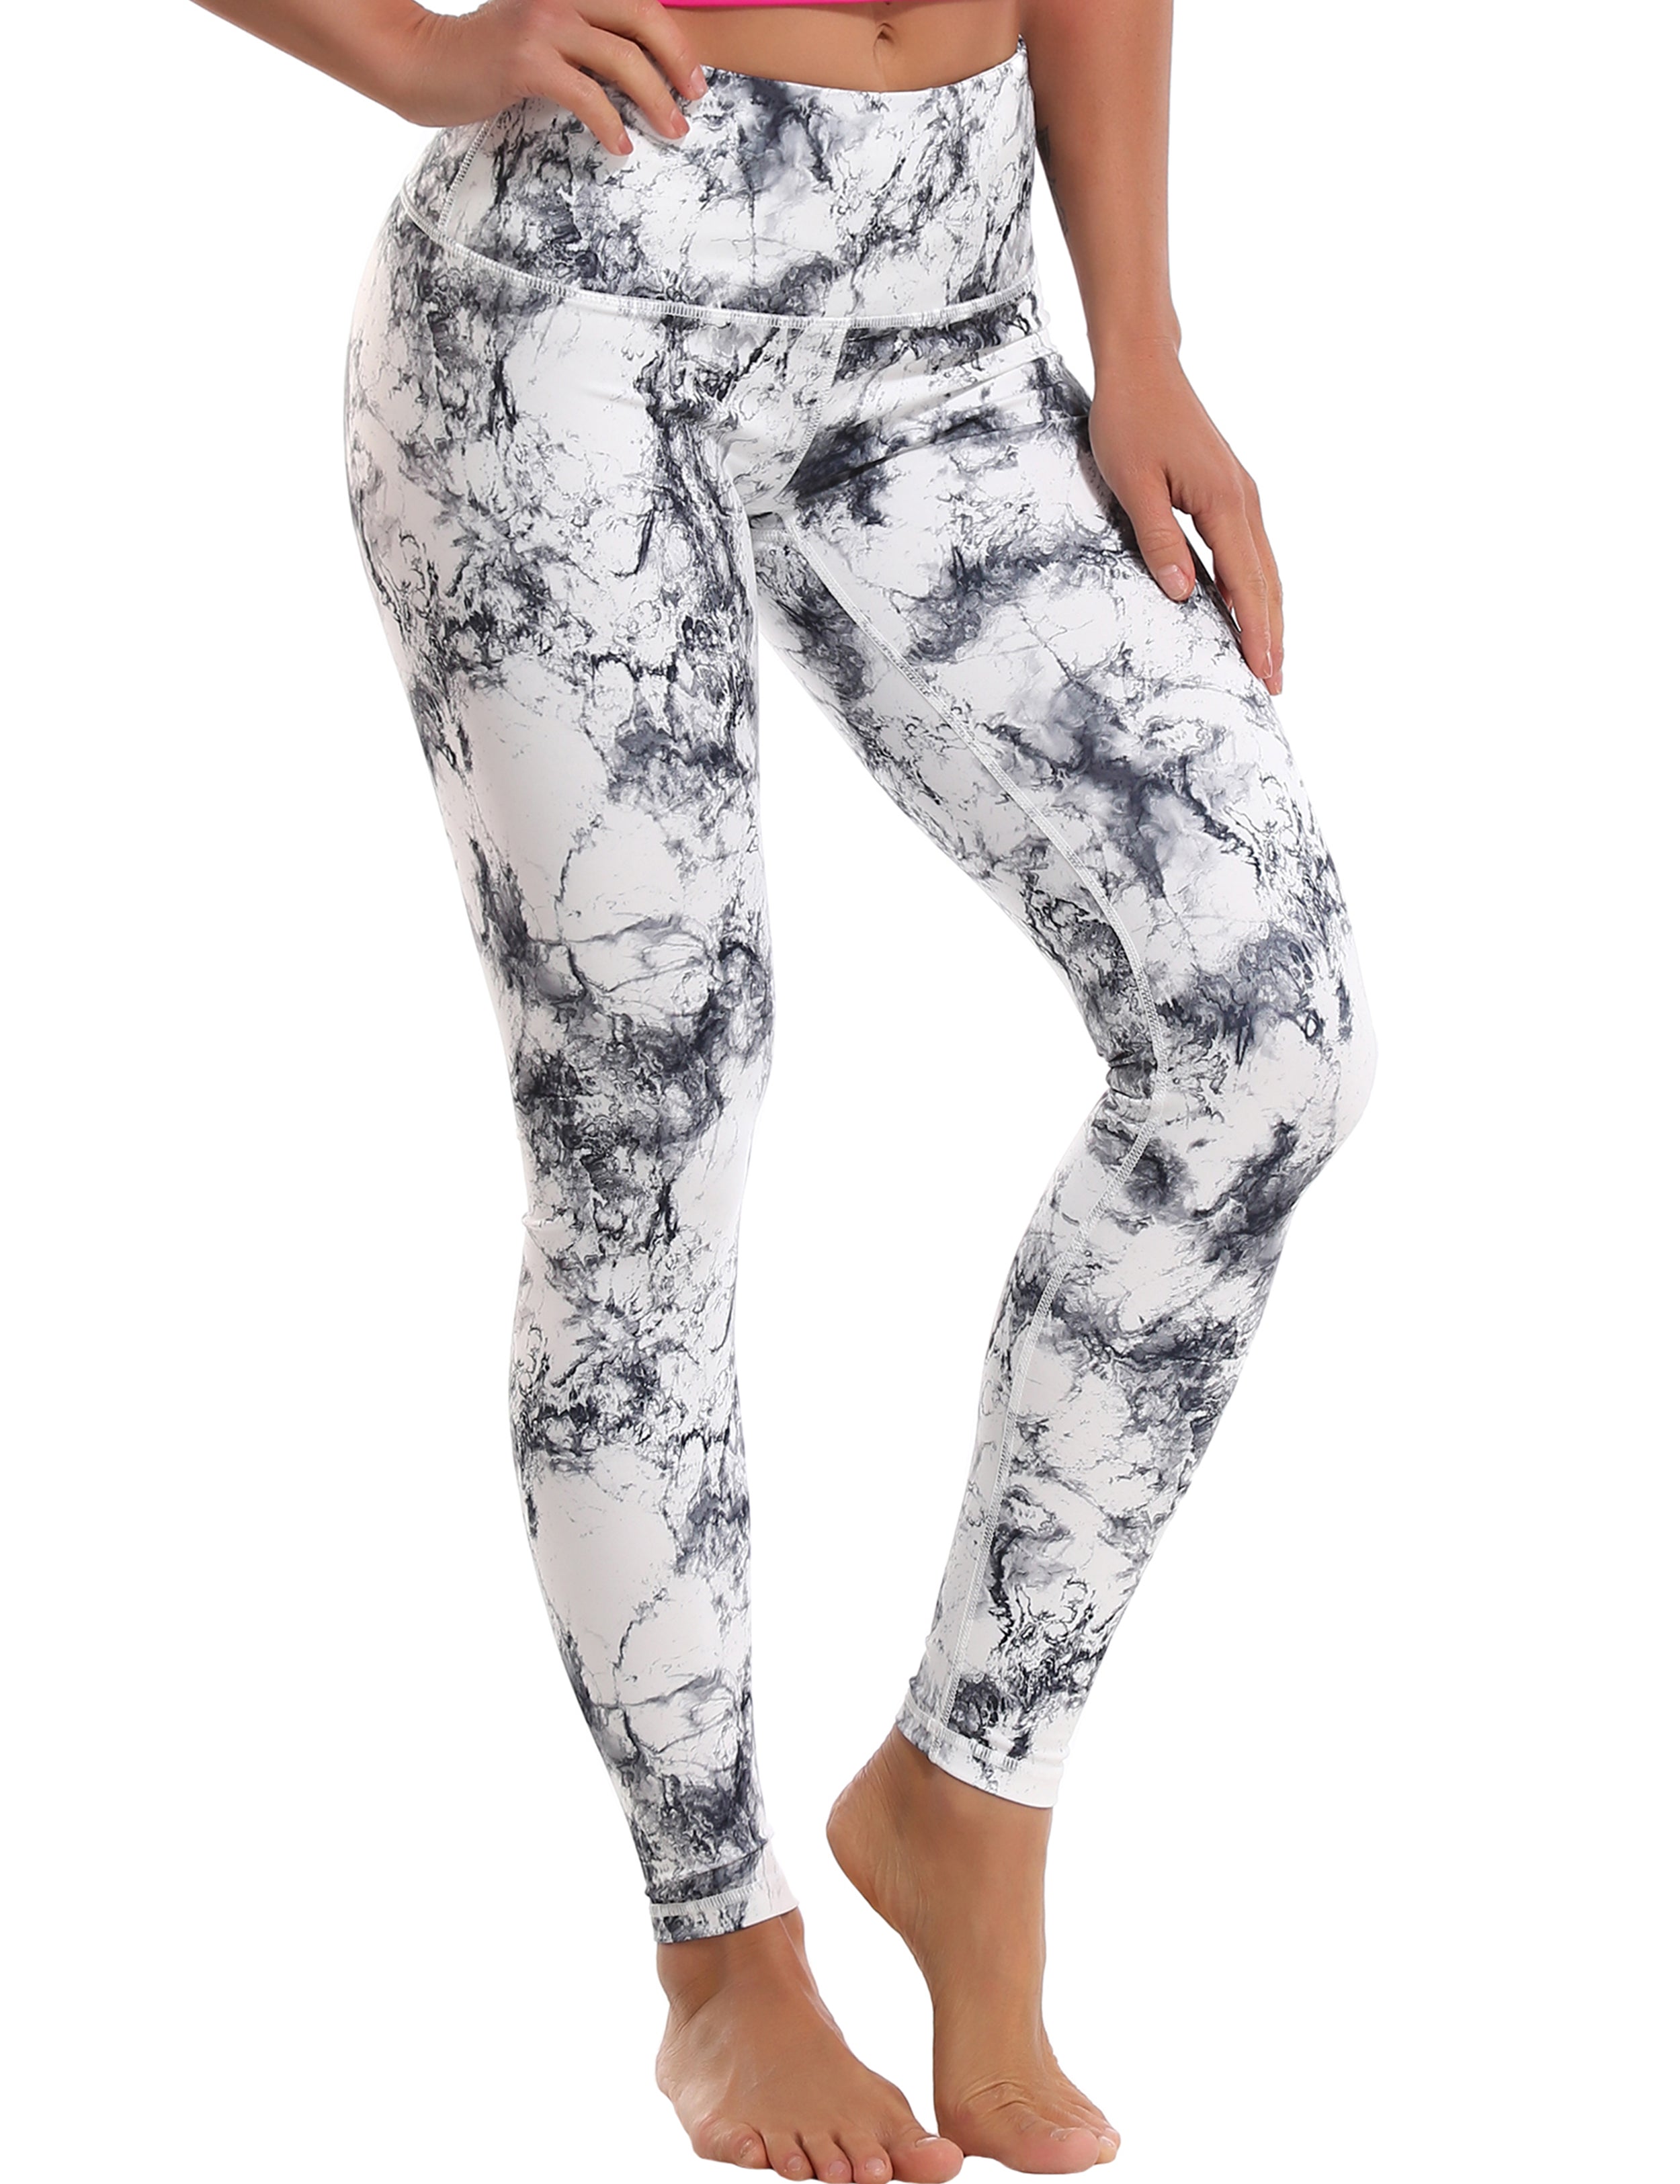 High Waist Yoga Pants arabescato 82%Polyester/18%Spandex Fabric doesn't attract lint easily 4-way stretch No see-through Moisture-wicking Tummy control Inner pocket